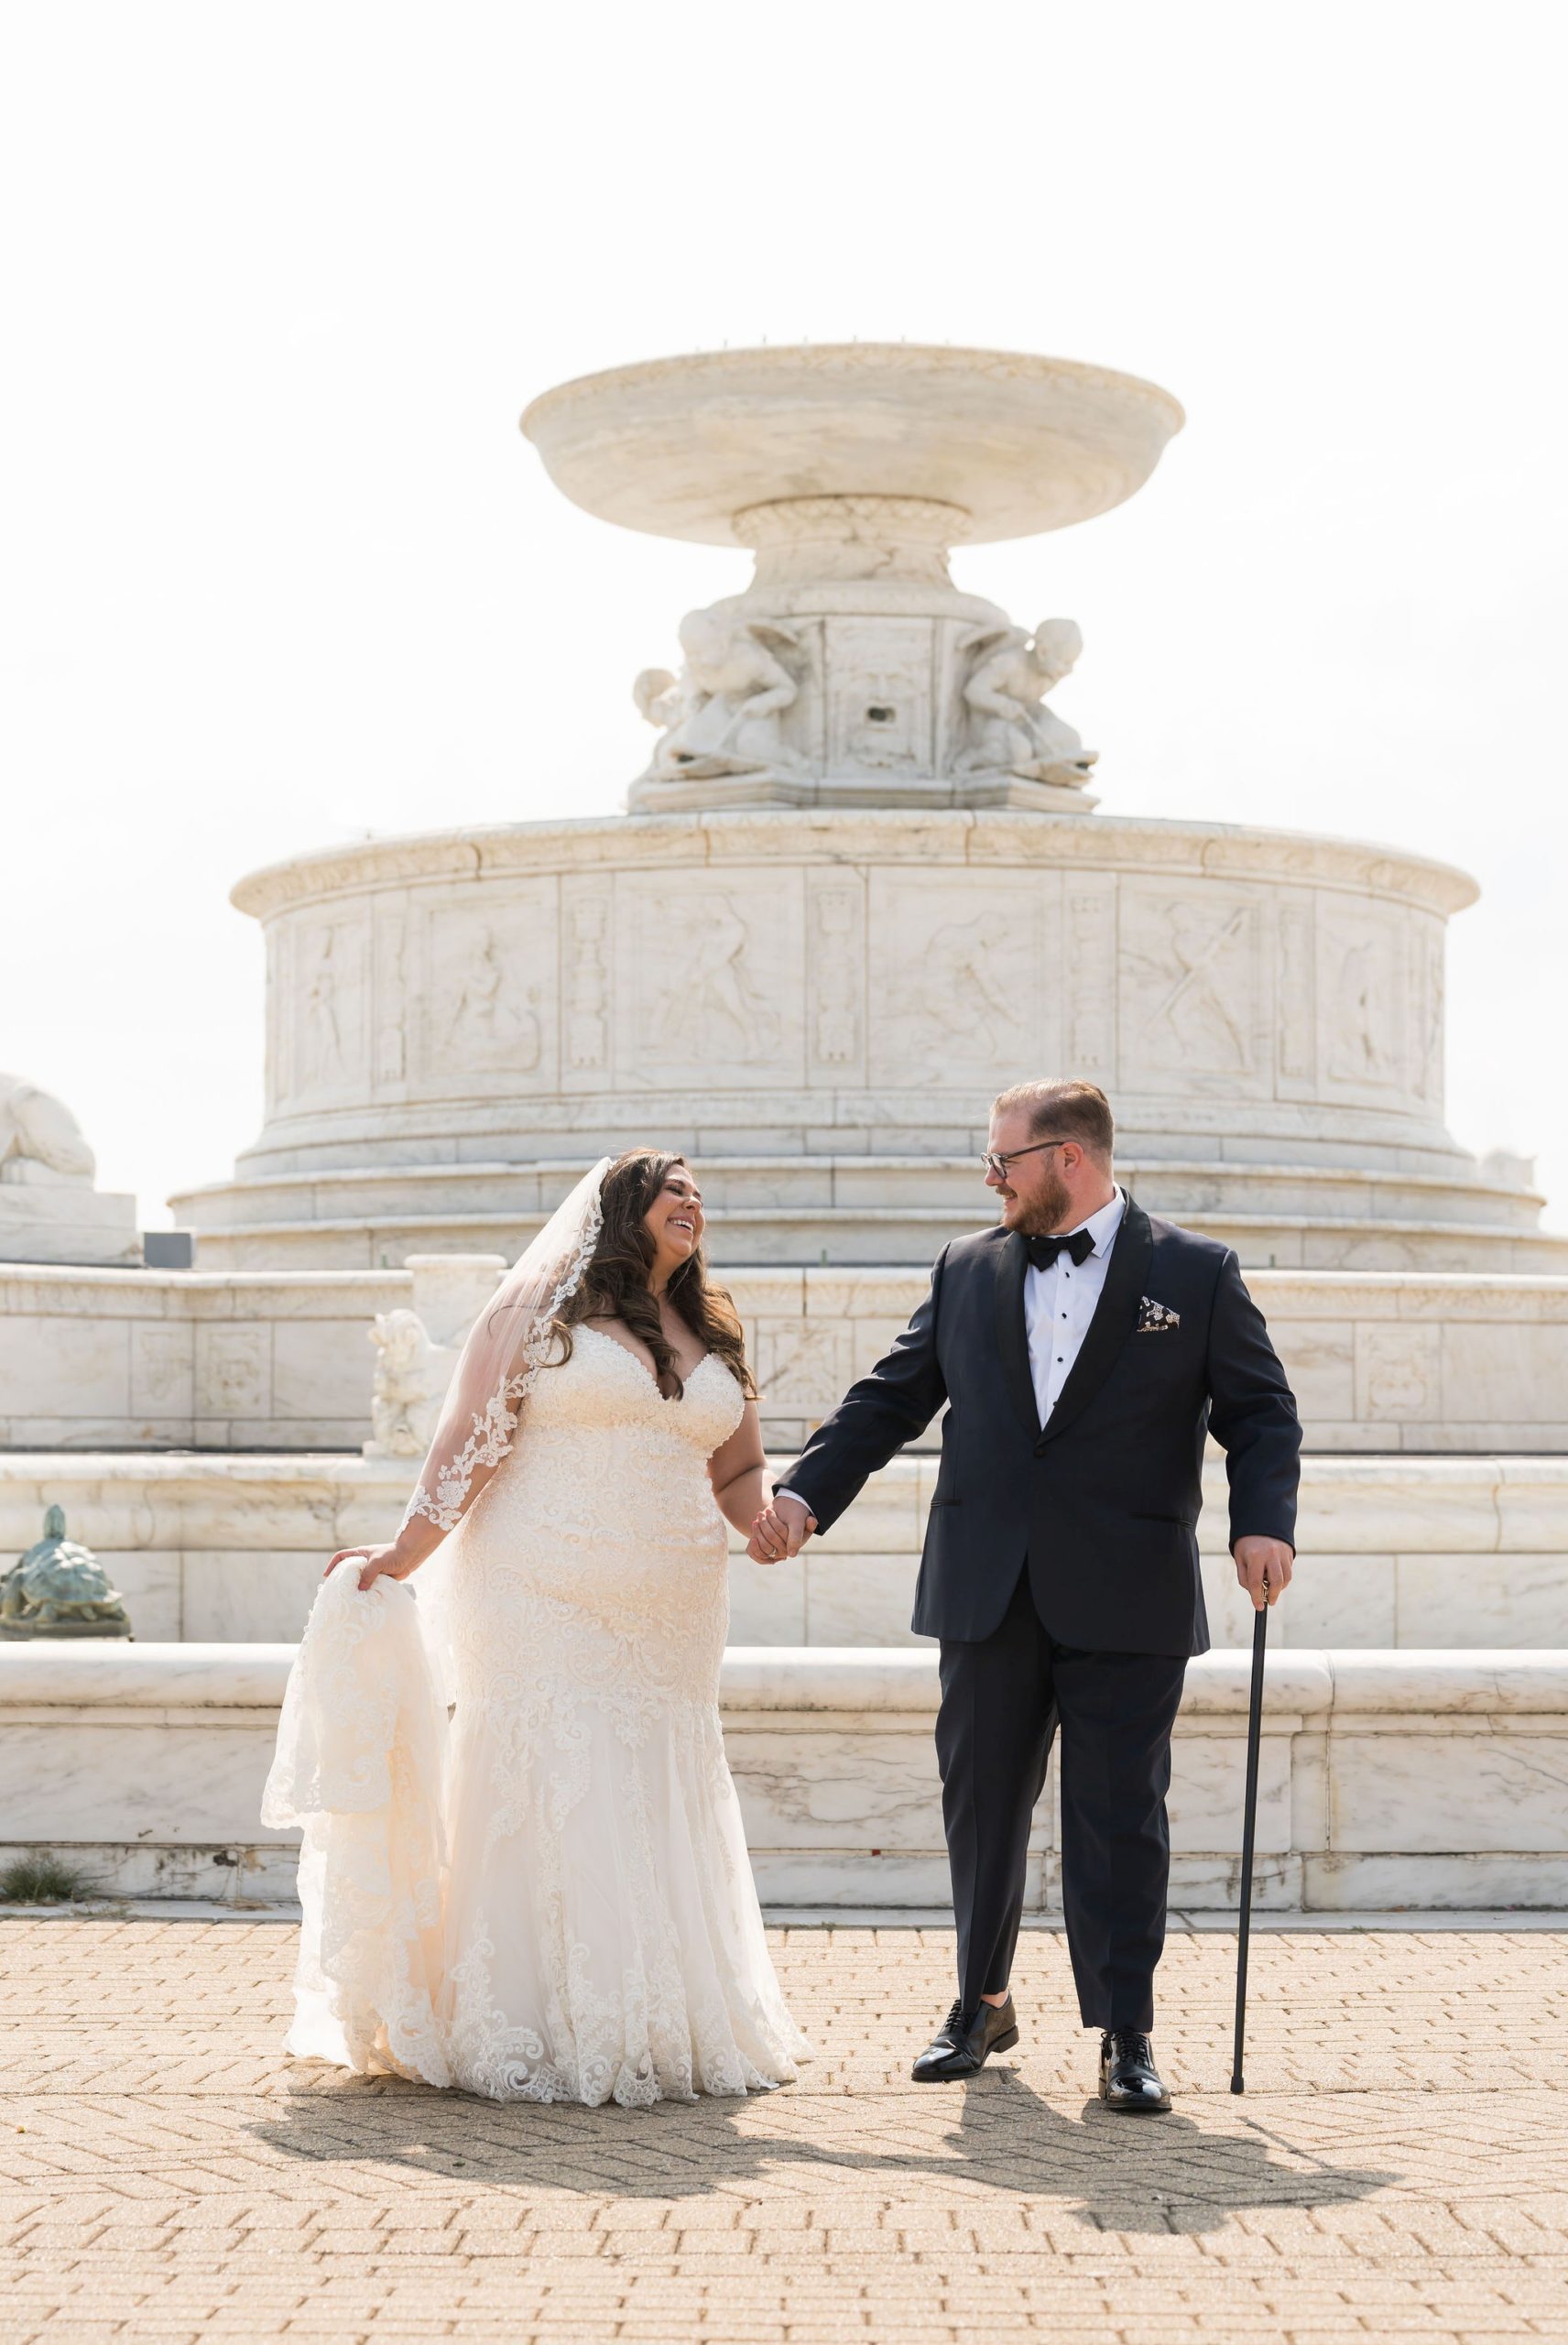 A married couple walks away from the Belle Isle Fountain on their wedding day. 